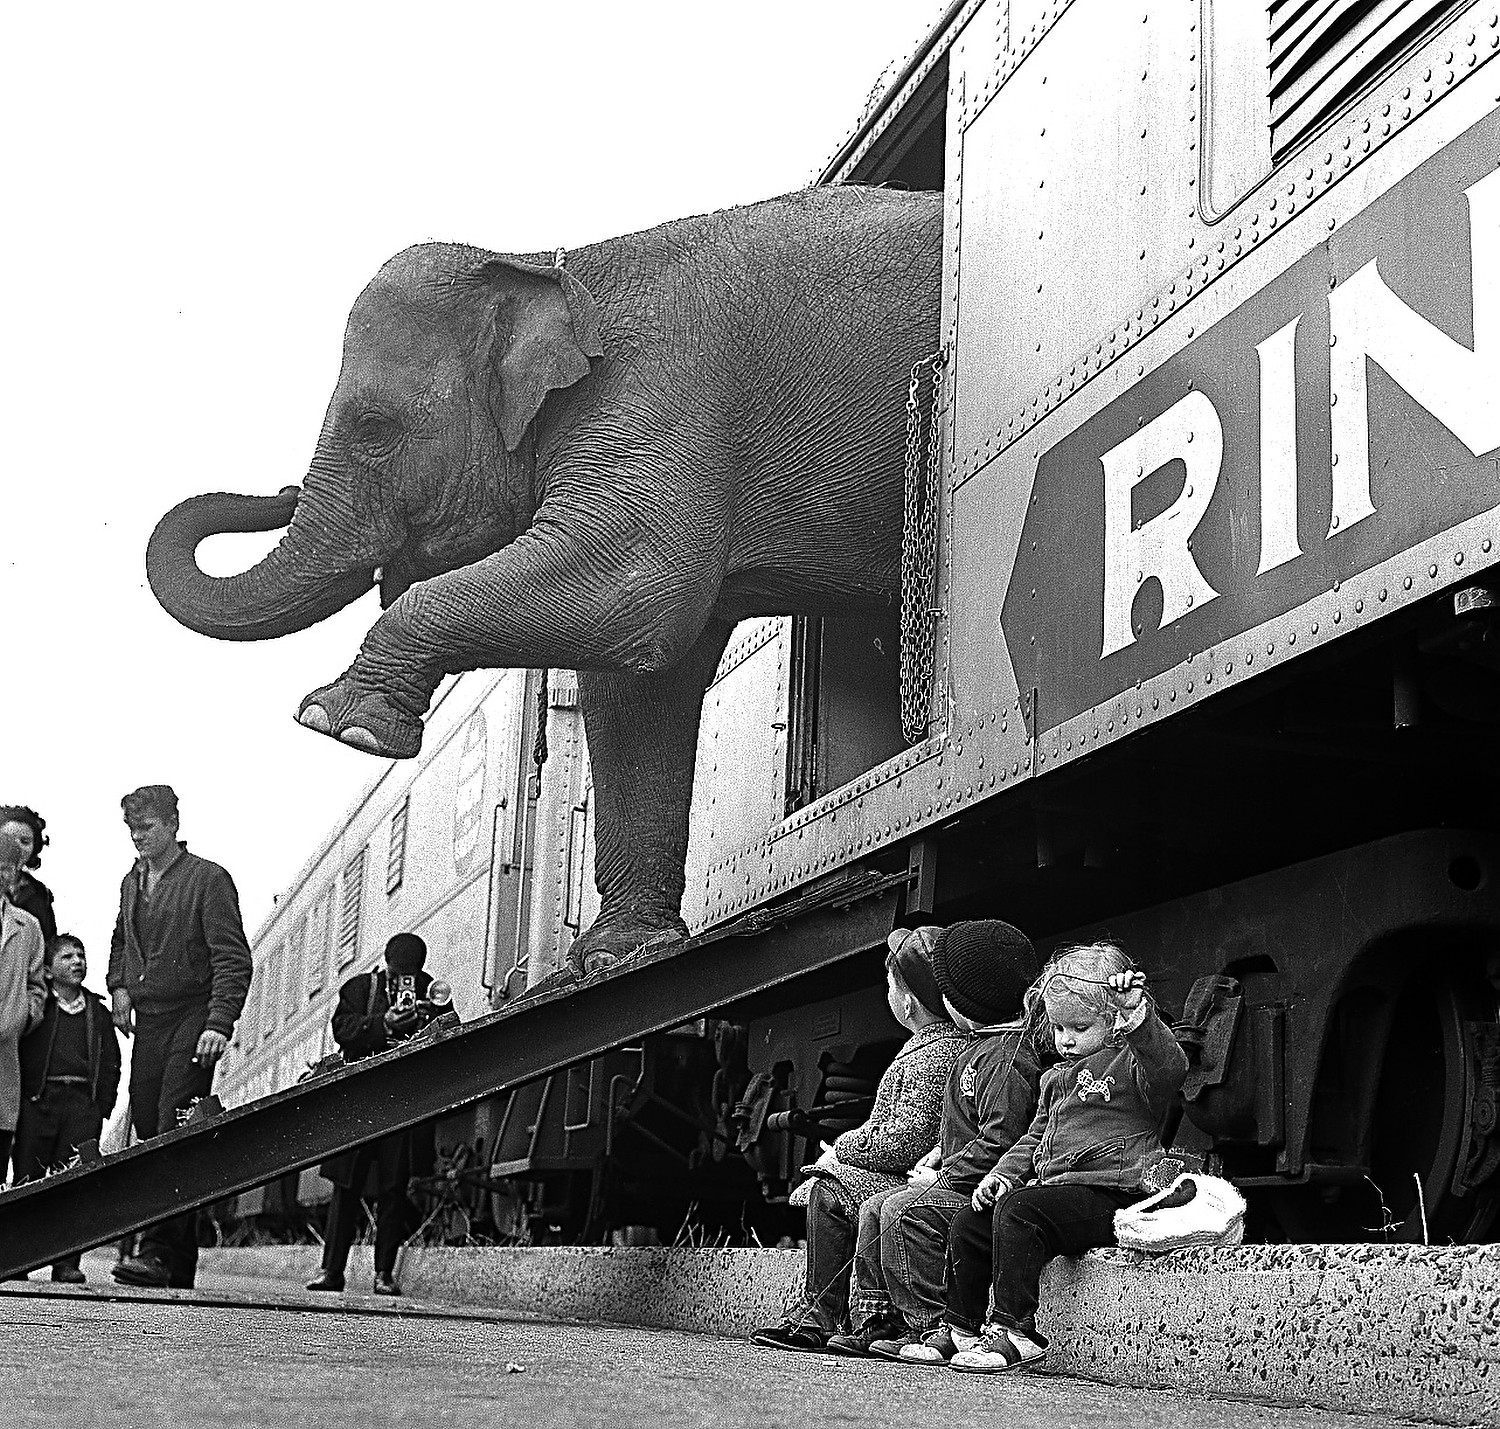 A Ringling Brothers Circus elephant walks out of a train car as young children watch in the Bronx railroad yard in New York City, April 1, 1963.